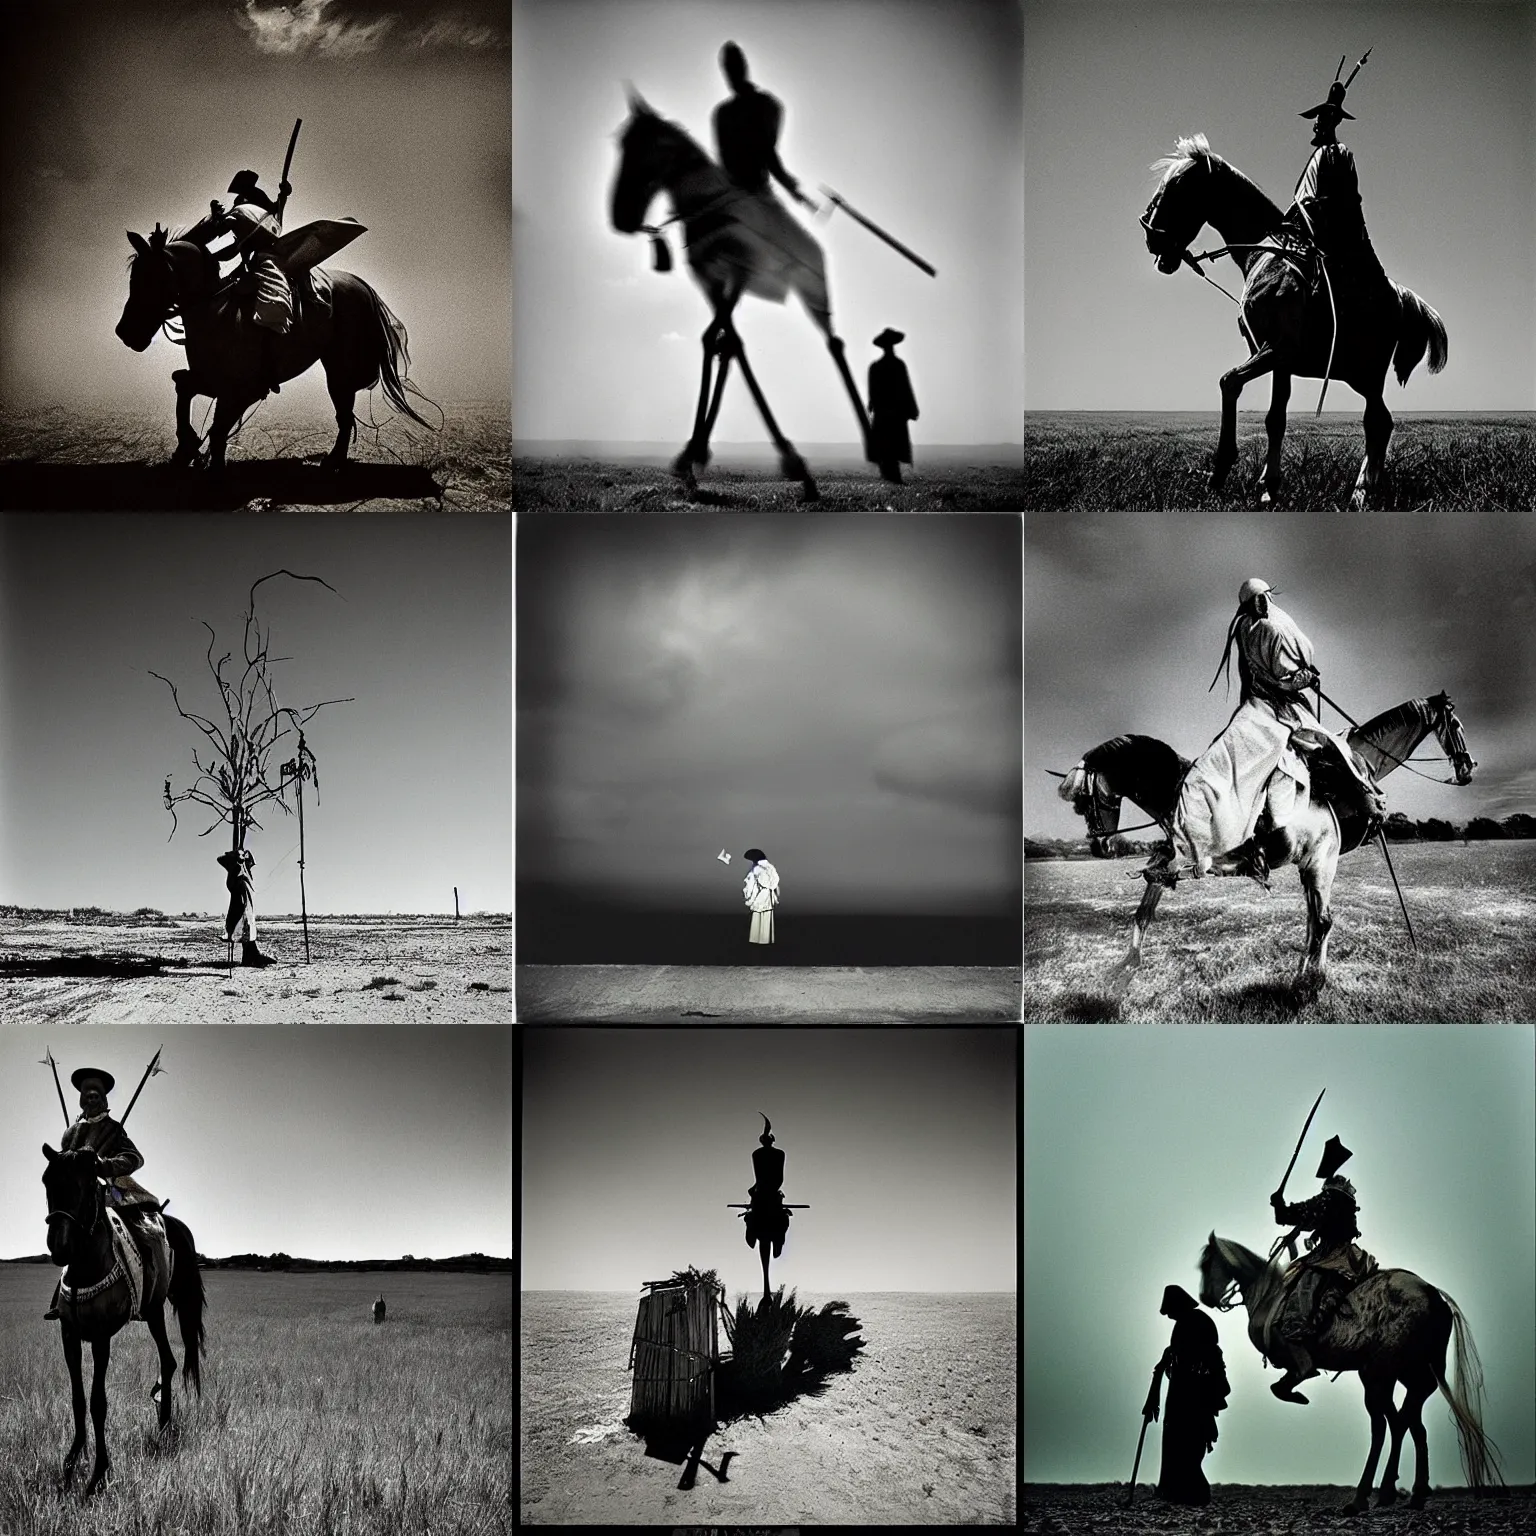 Prompt: “Don Quixote, photo by Trent Parke, Magnum photos, award winning”